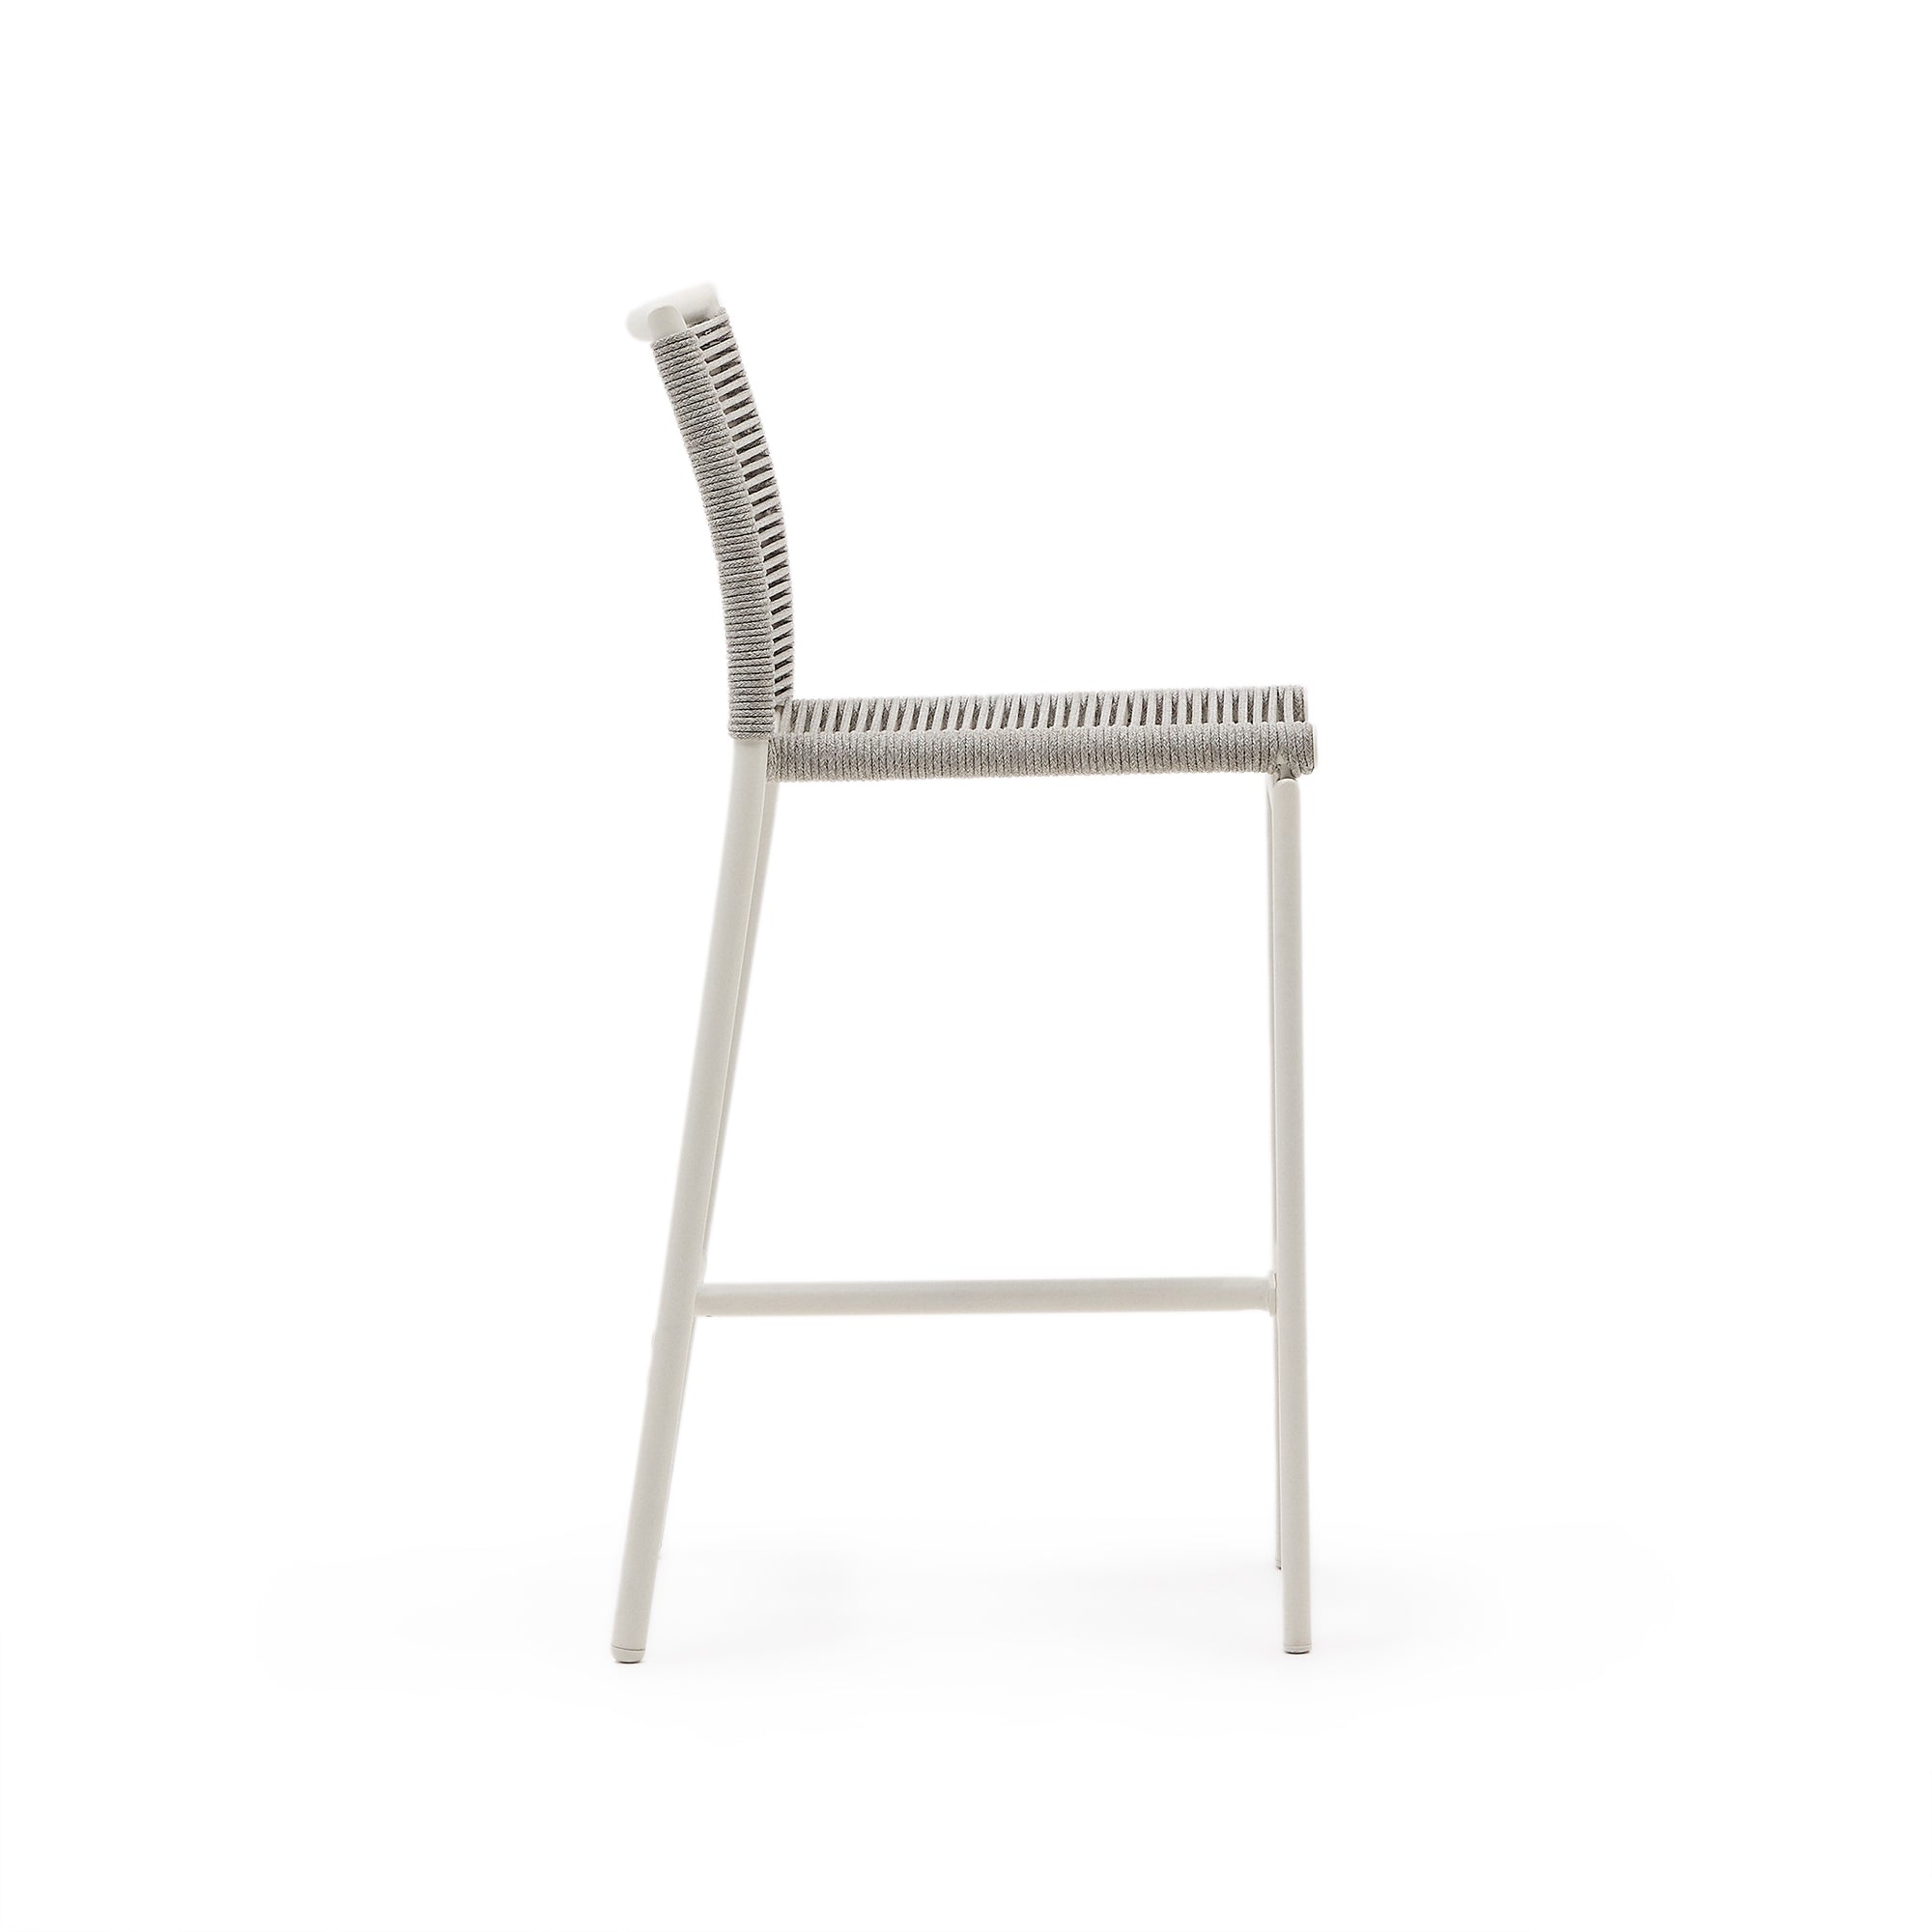 Culip outdoor chair made of rope and white aluminum, 65 cm